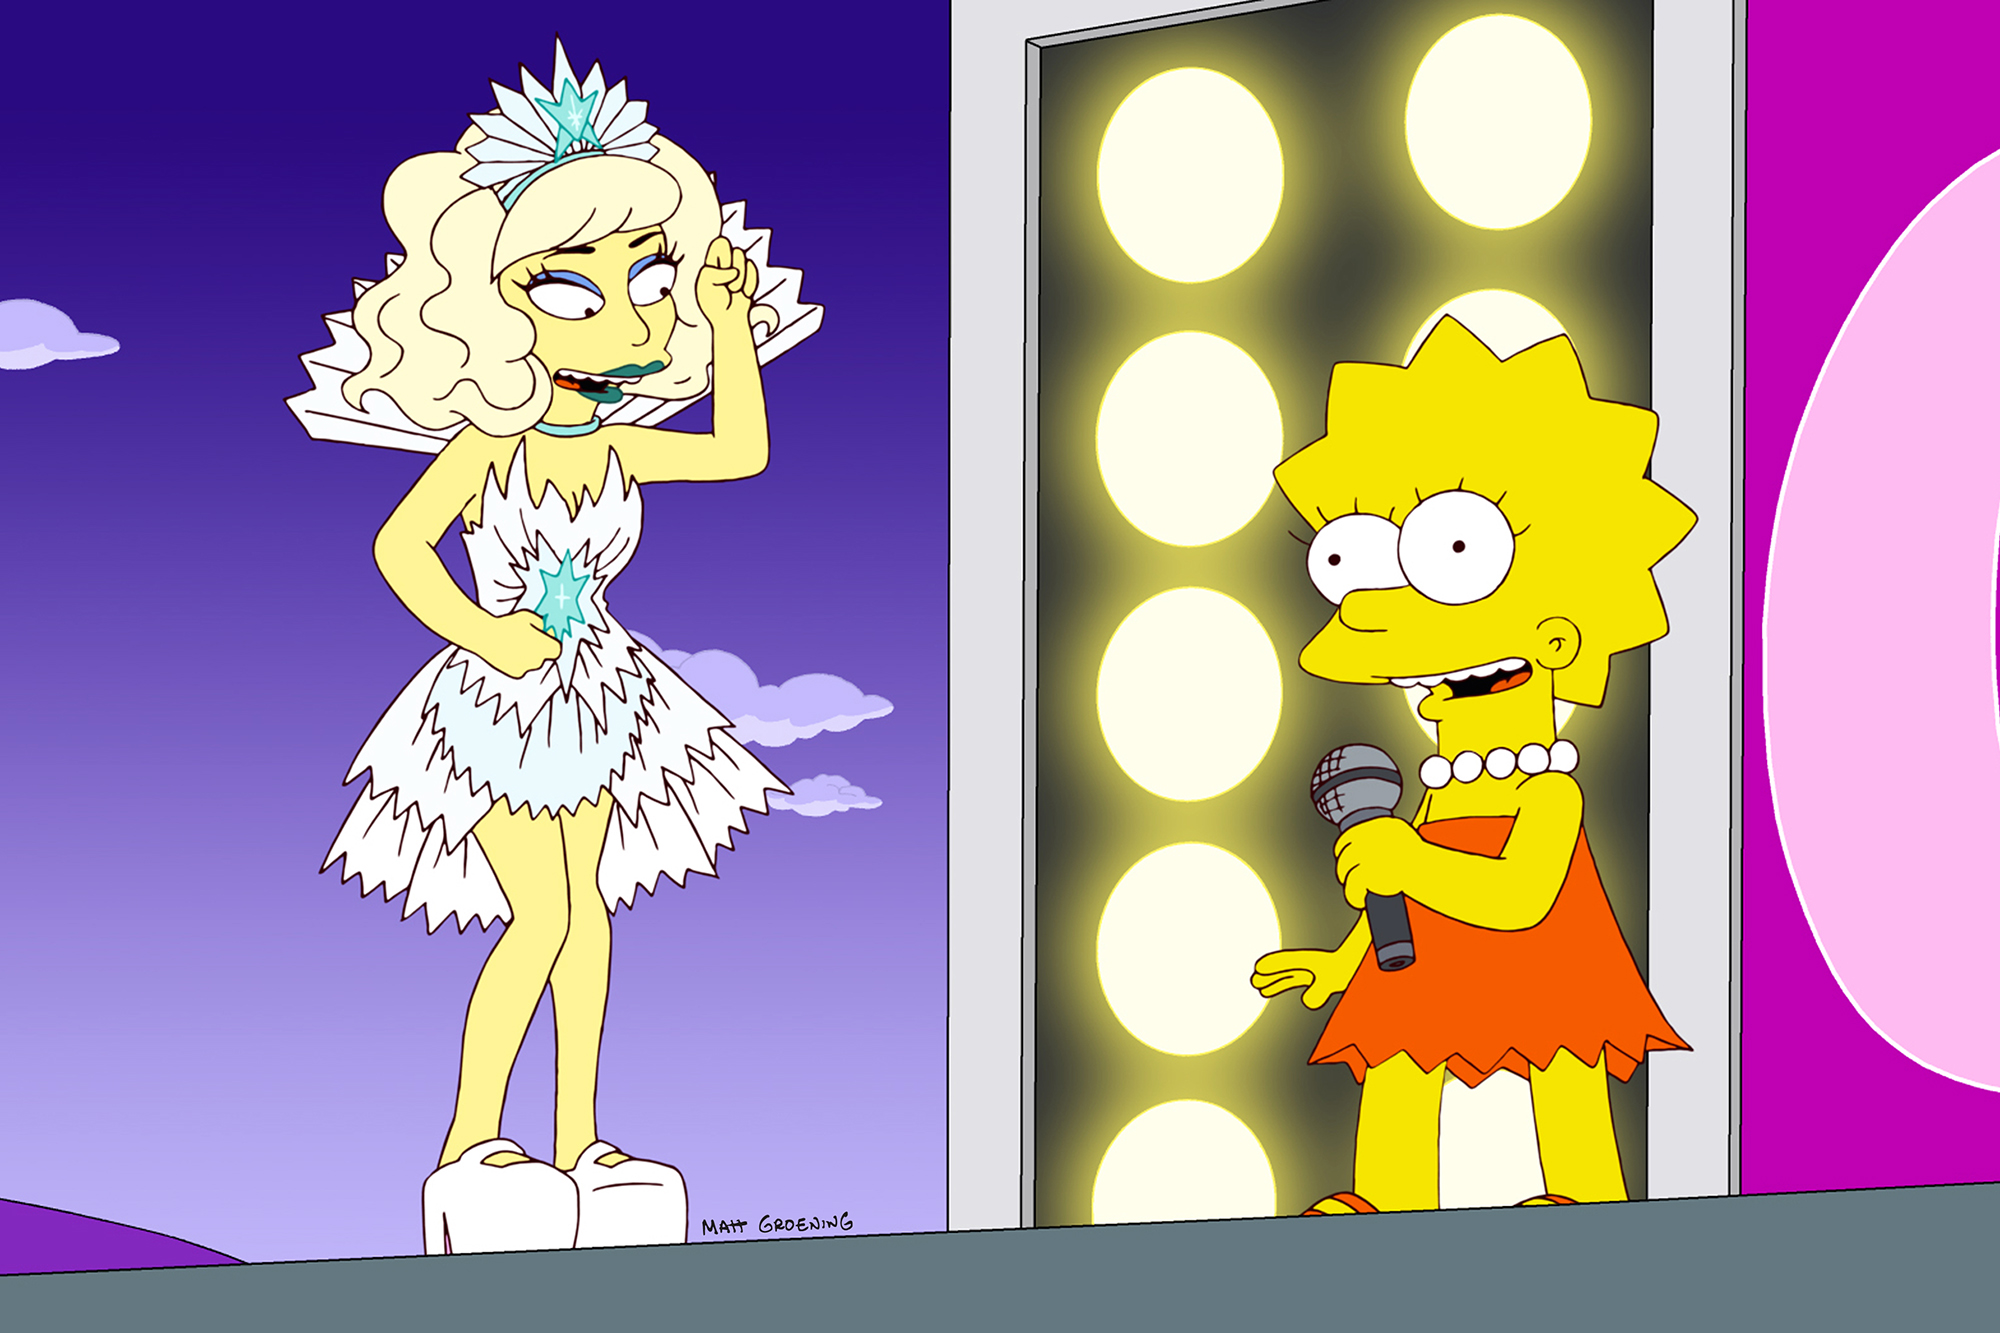 THE SIMPSONS: Lady Gaga (guest-voicing as herself) wants to help  Lisa realize that being herself is better than being like anyone else in the "Lisa Goes Gaga" season finale episode of THE SIMPSONS airing Sunday, May 20 (8:00-8:30 PM ET/PT) on FOX.  THE SIMPSONS ™ and © 2012 TCFFC ALL RIGHTS RESERVED.